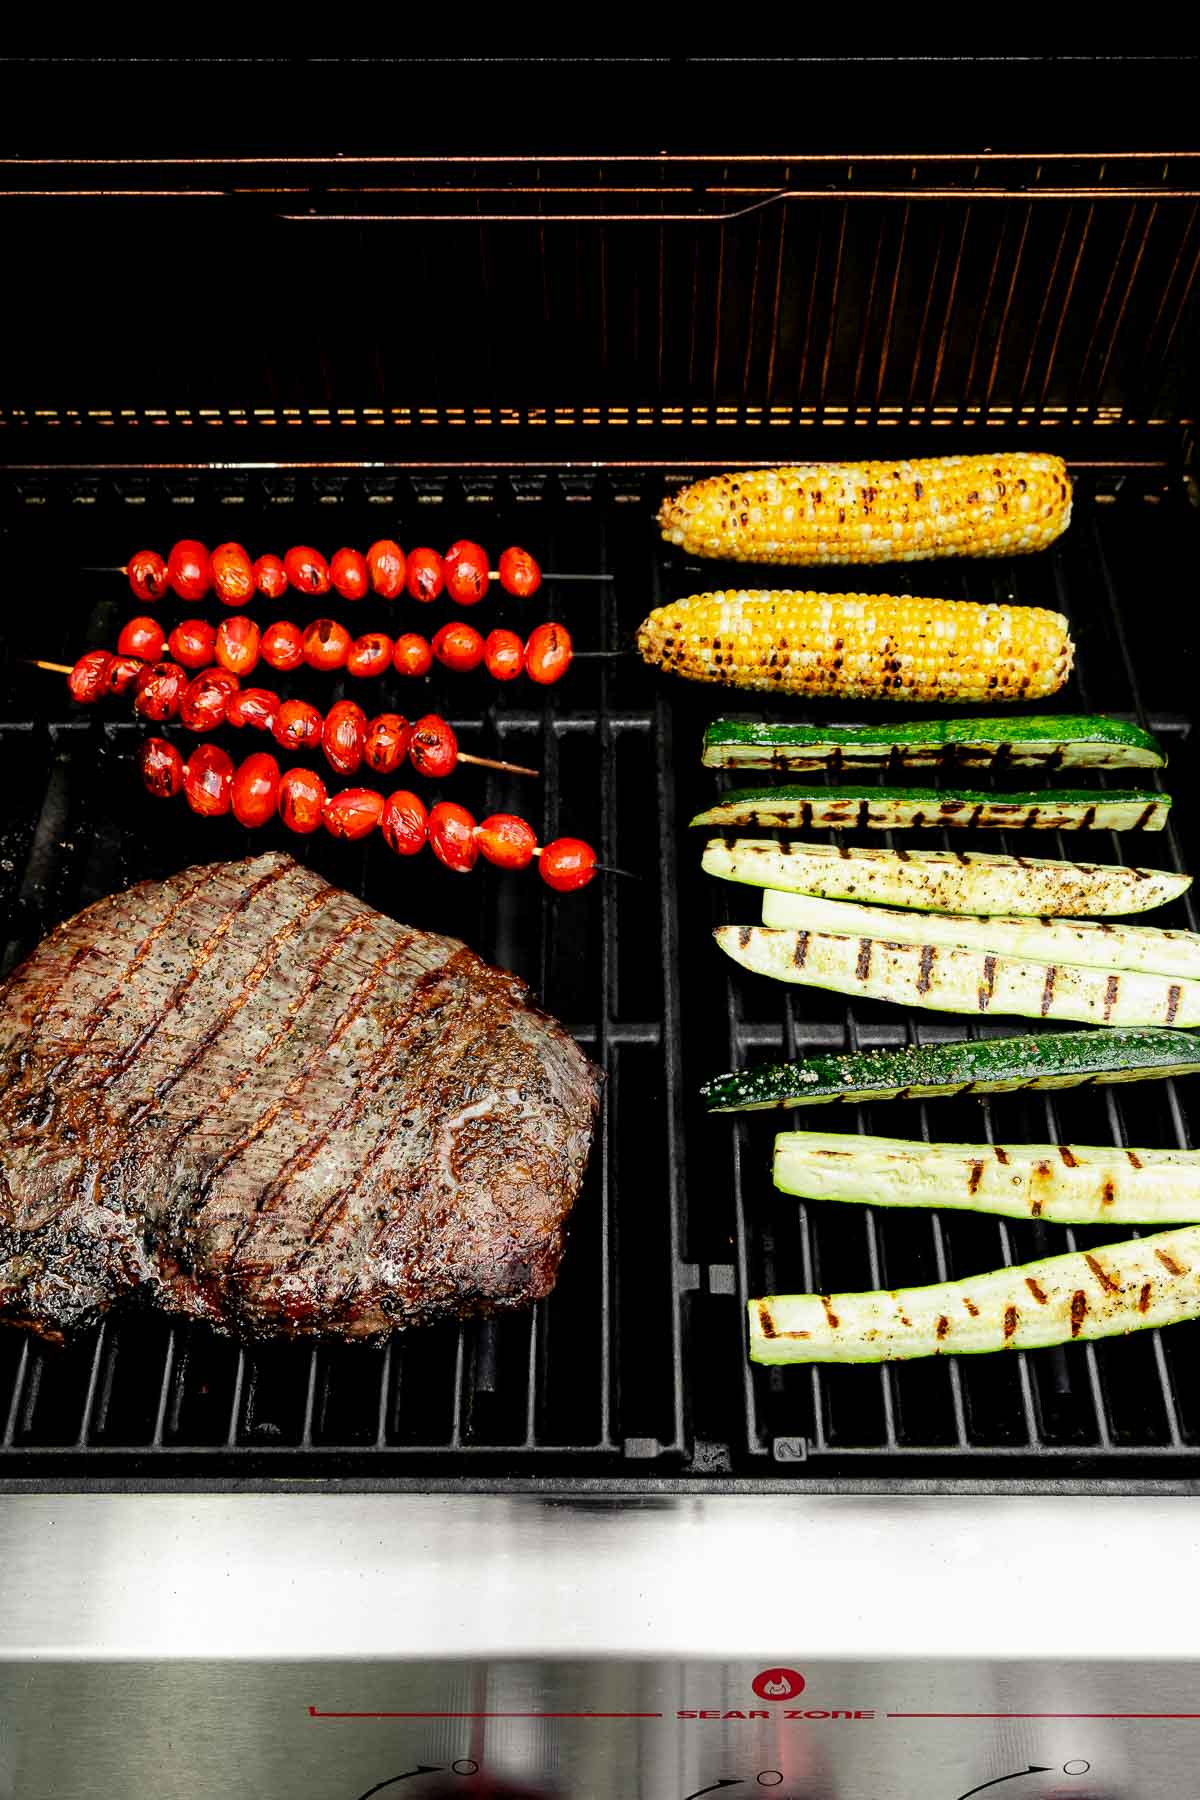 A shot of steak and vegetables being grilled over an open flame.